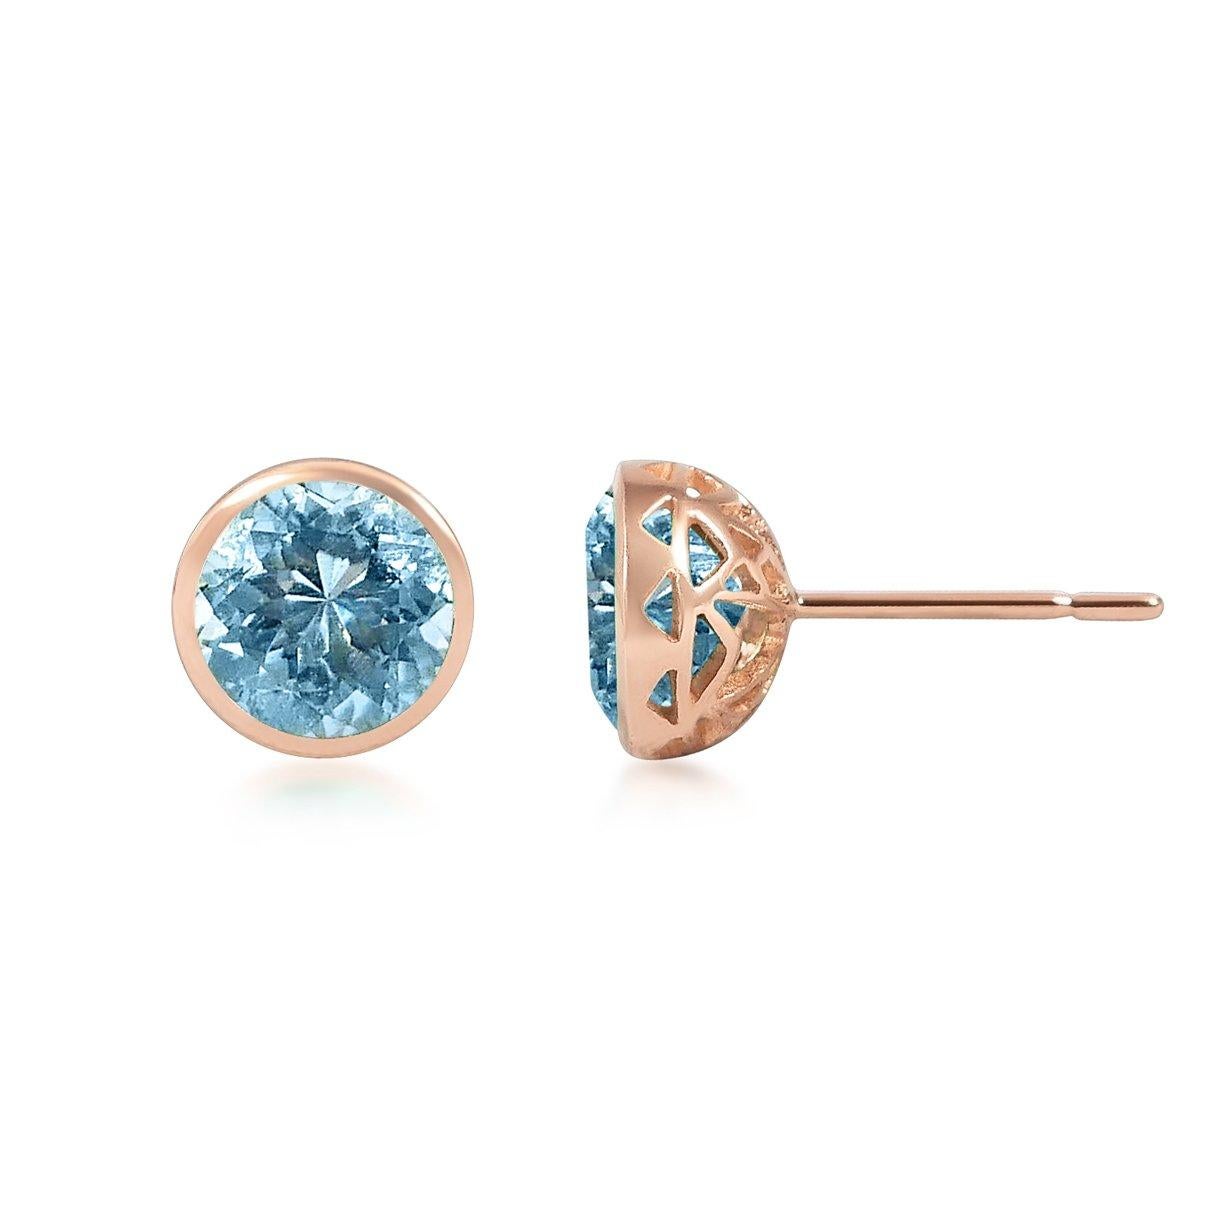 Round Cut Handcrafted 2.70 Carats Aquamarine 18 Karat Rose Gold Stud Earrings For Sale